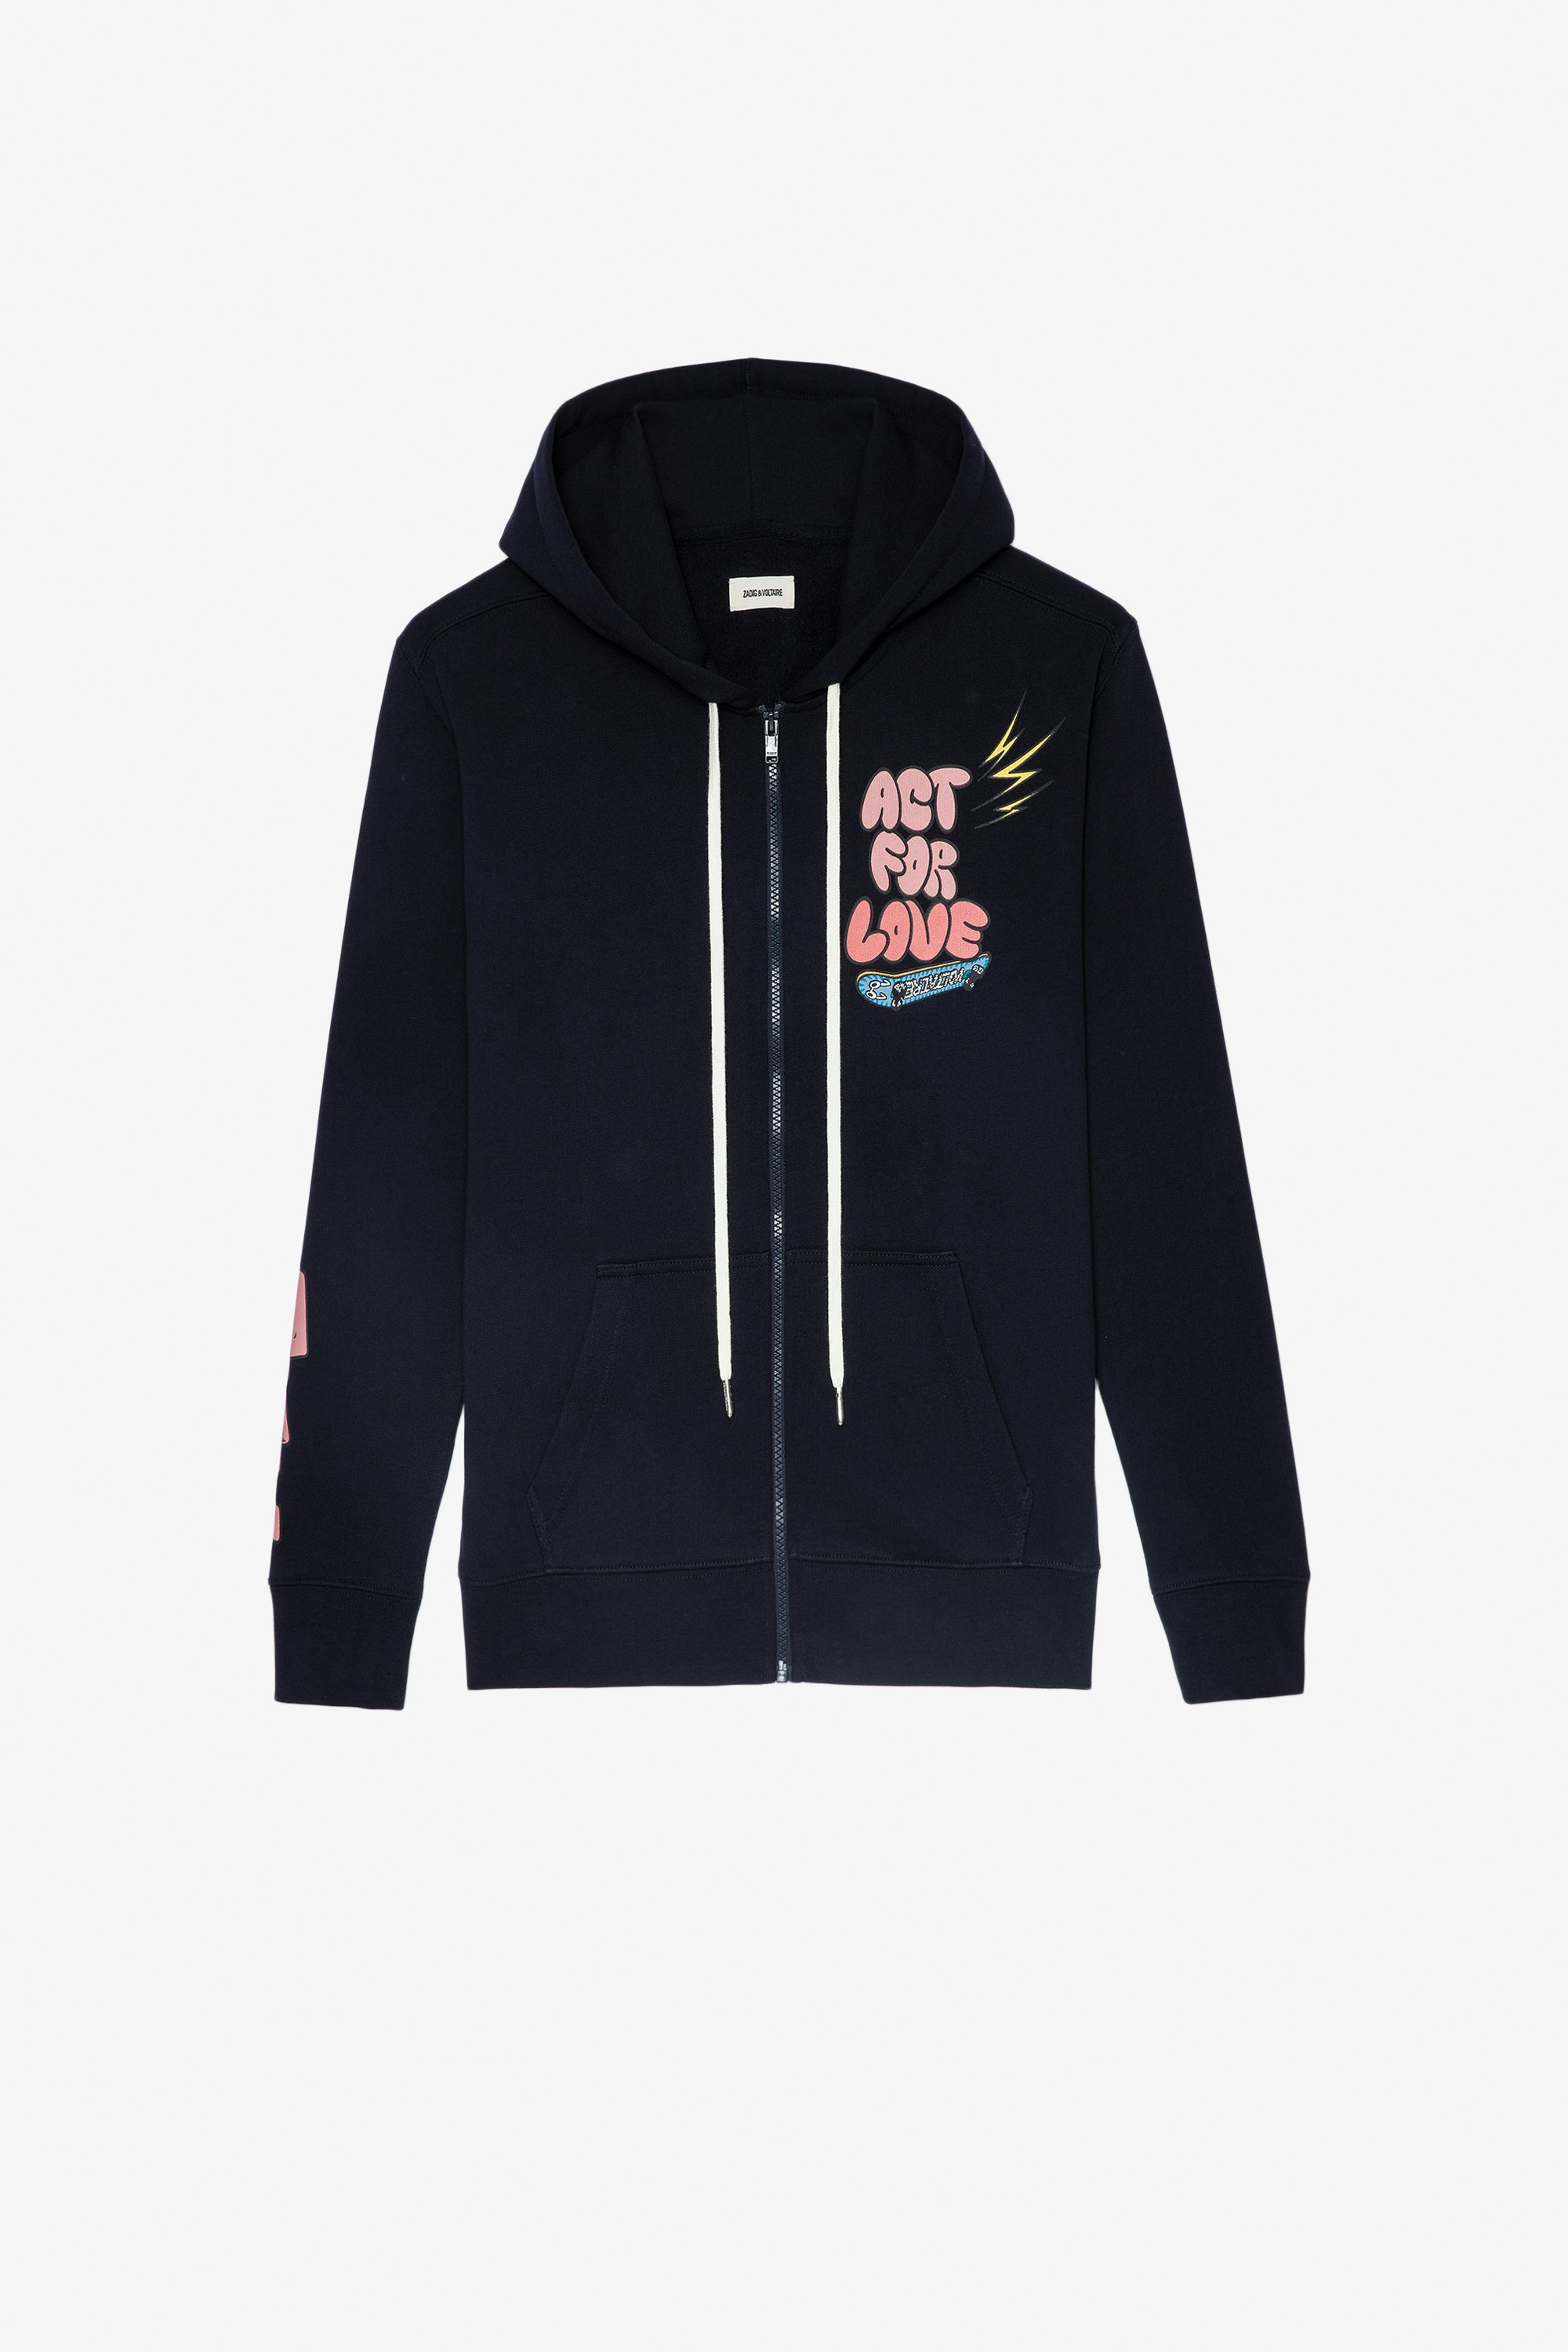 Spencer Hoodie Women's navy blue cotton hoodie with zipper, Core Cho print and ZV signature drawstrings